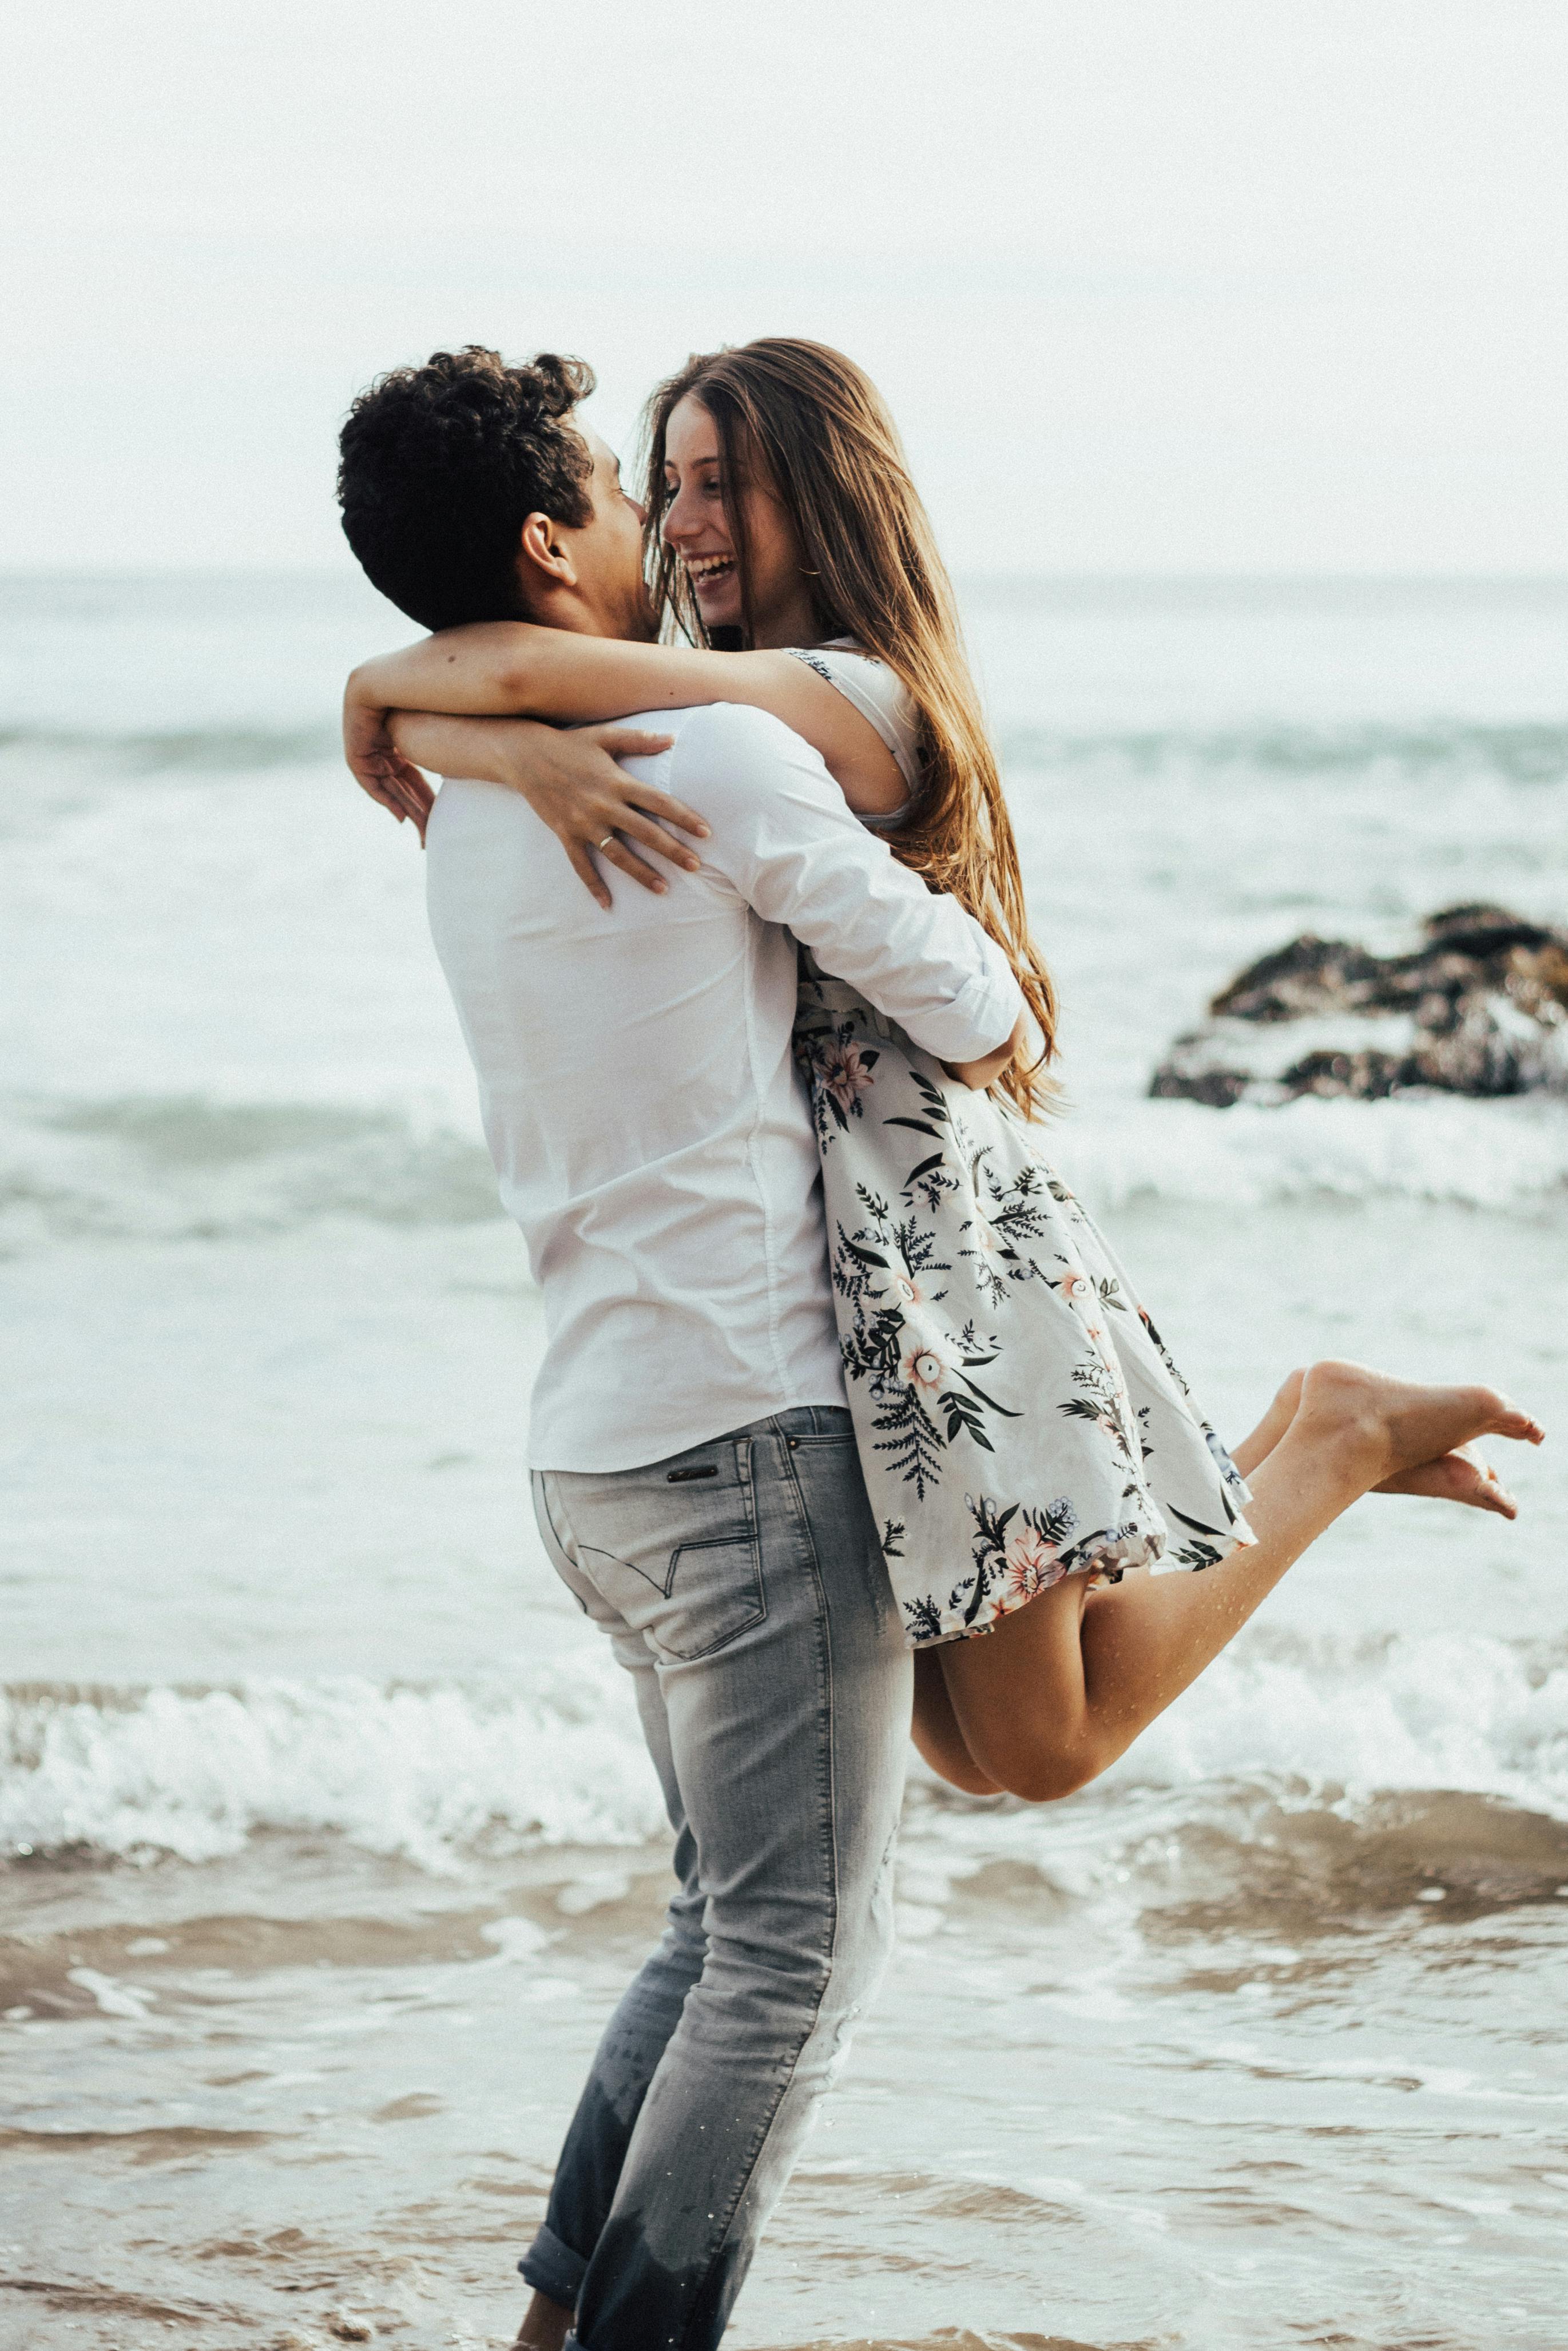 10,000+ Best Lovers Images · 100% Free Download · Pexels Stock Photos